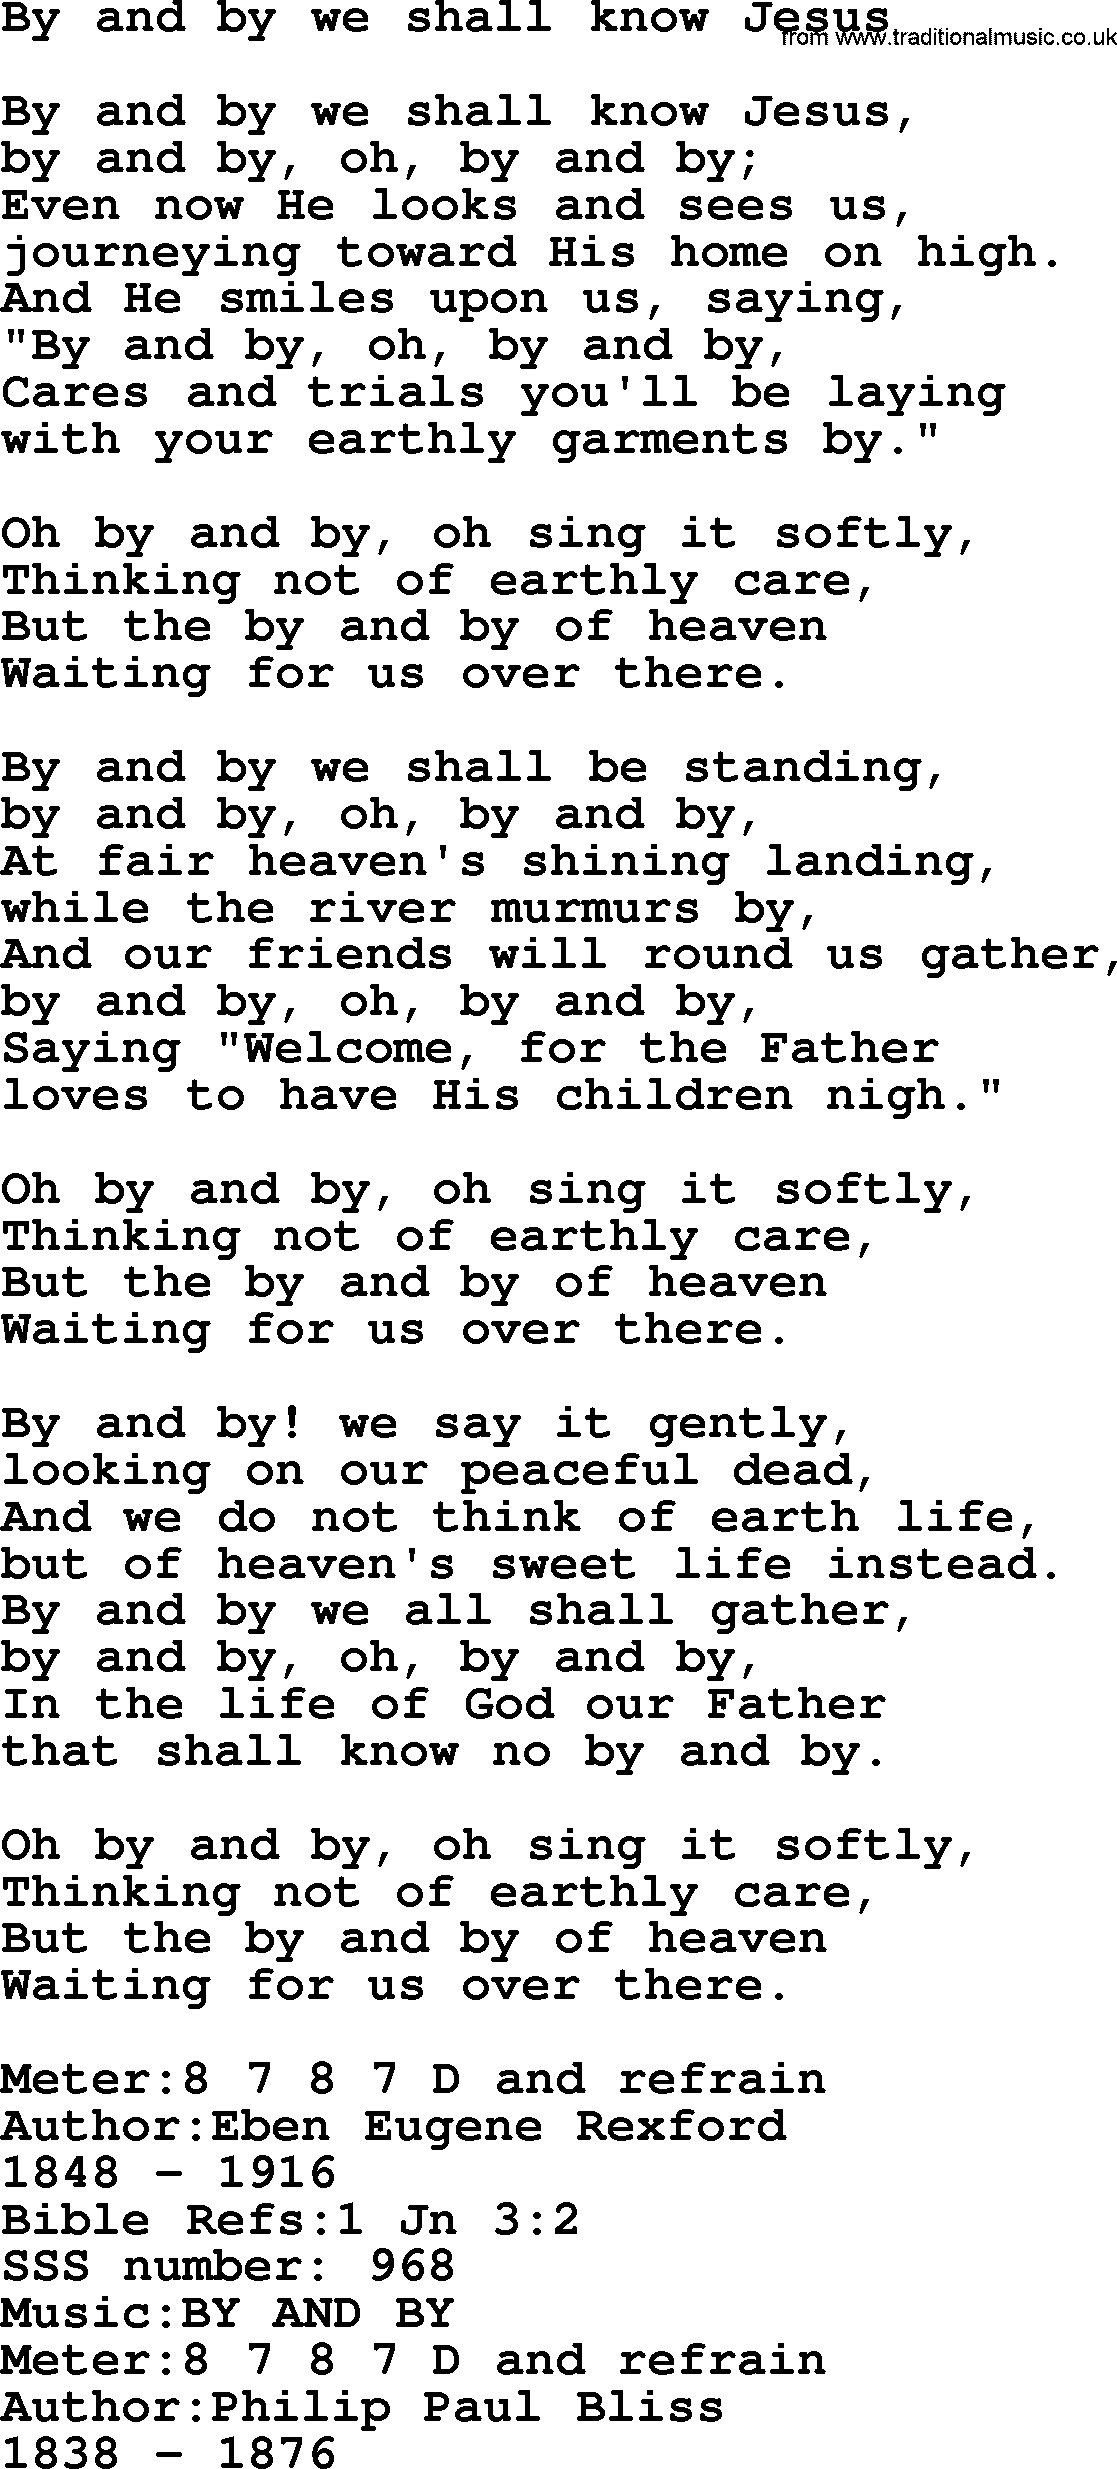 Sacred Songs and Solos complete, 1200 Hymns, title: By And By We Shall Know Jesus, lyrics and PDF